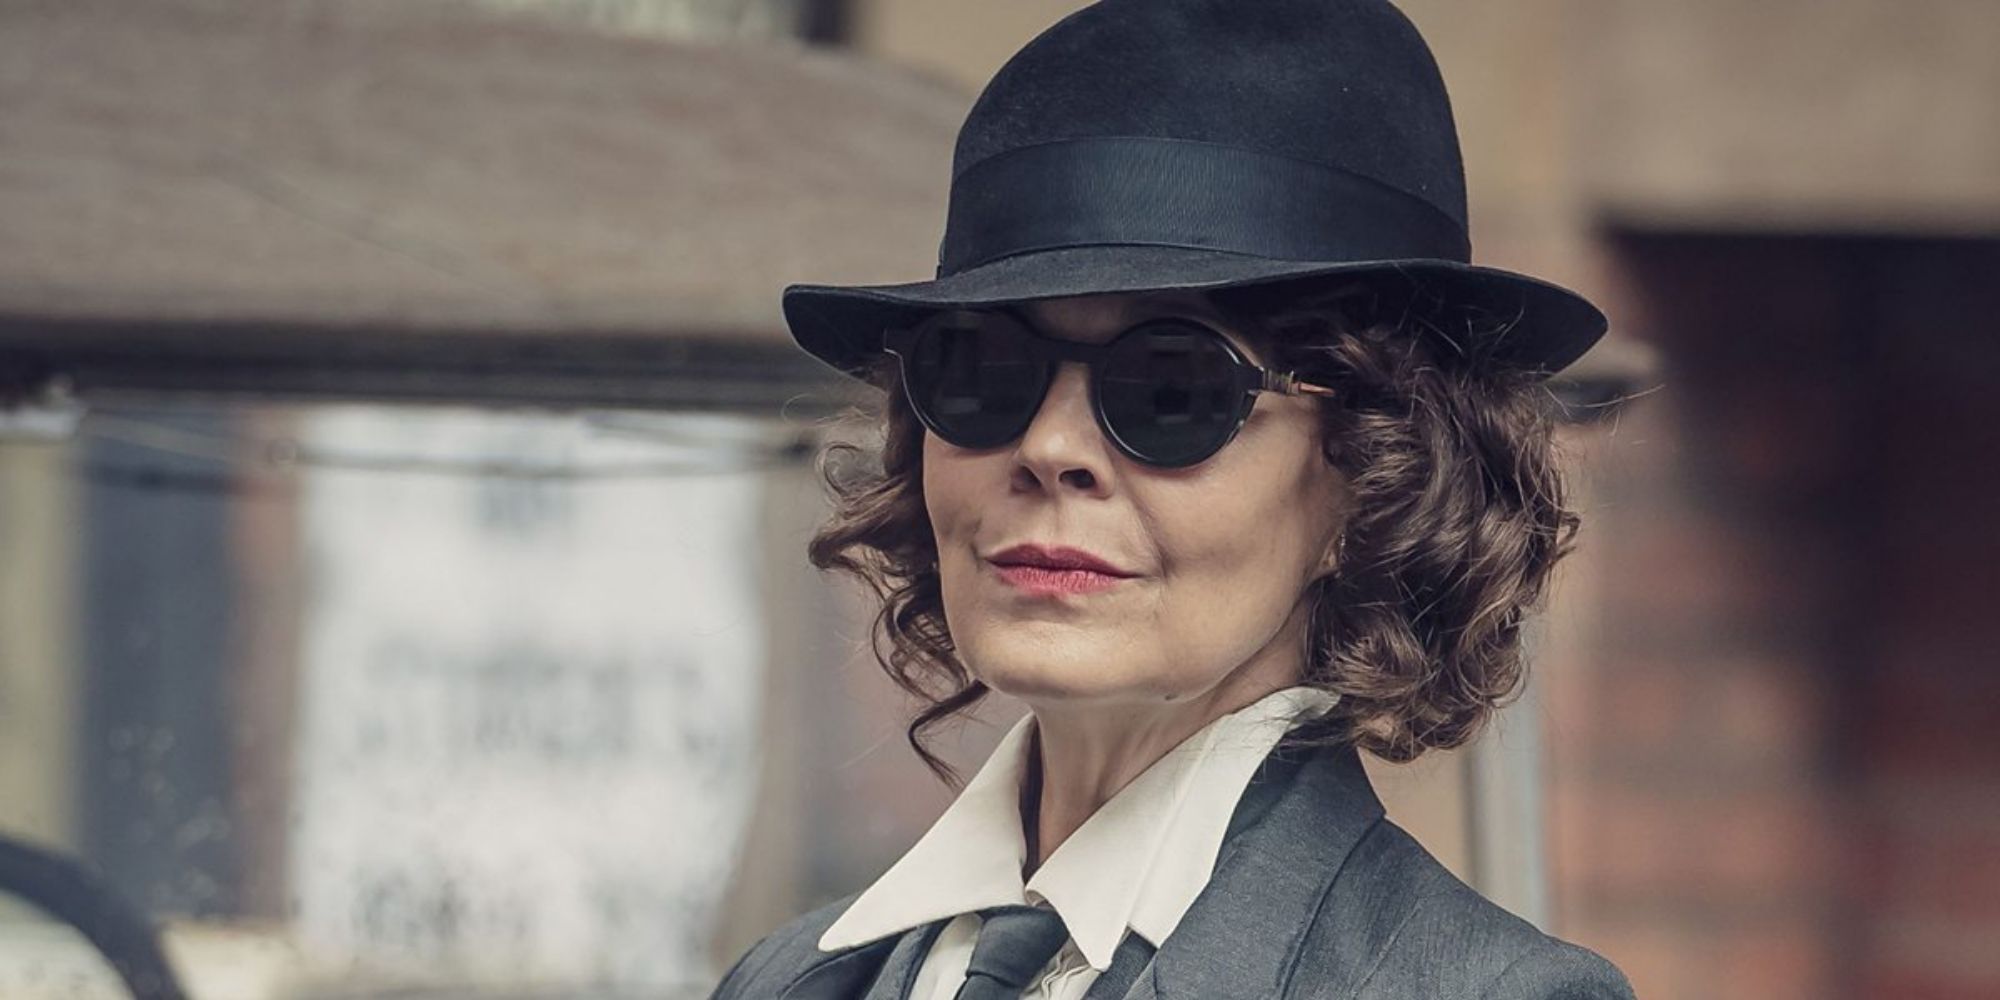 Image of Polly Gray from TV show Peaky Blinders.